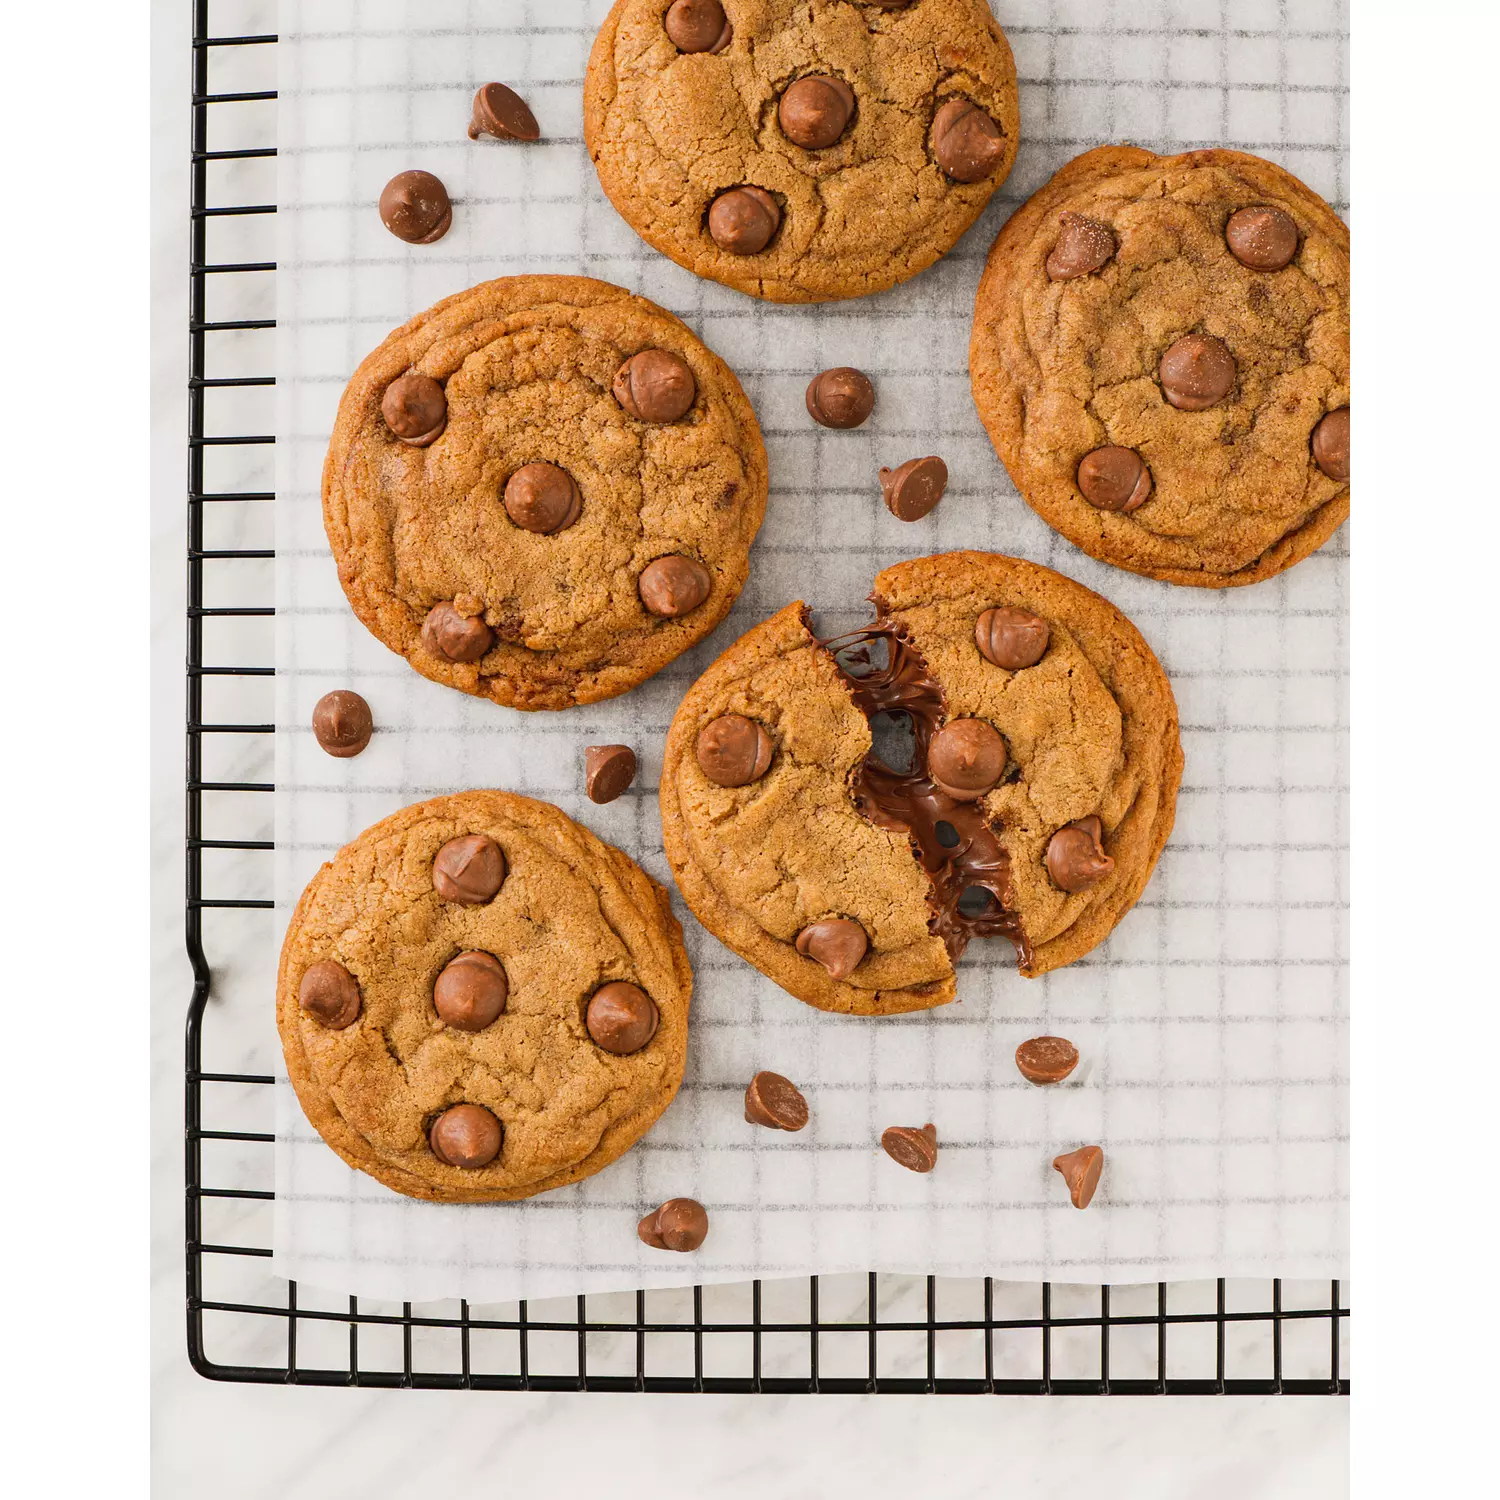 Nutella Chunk Cookies hover image